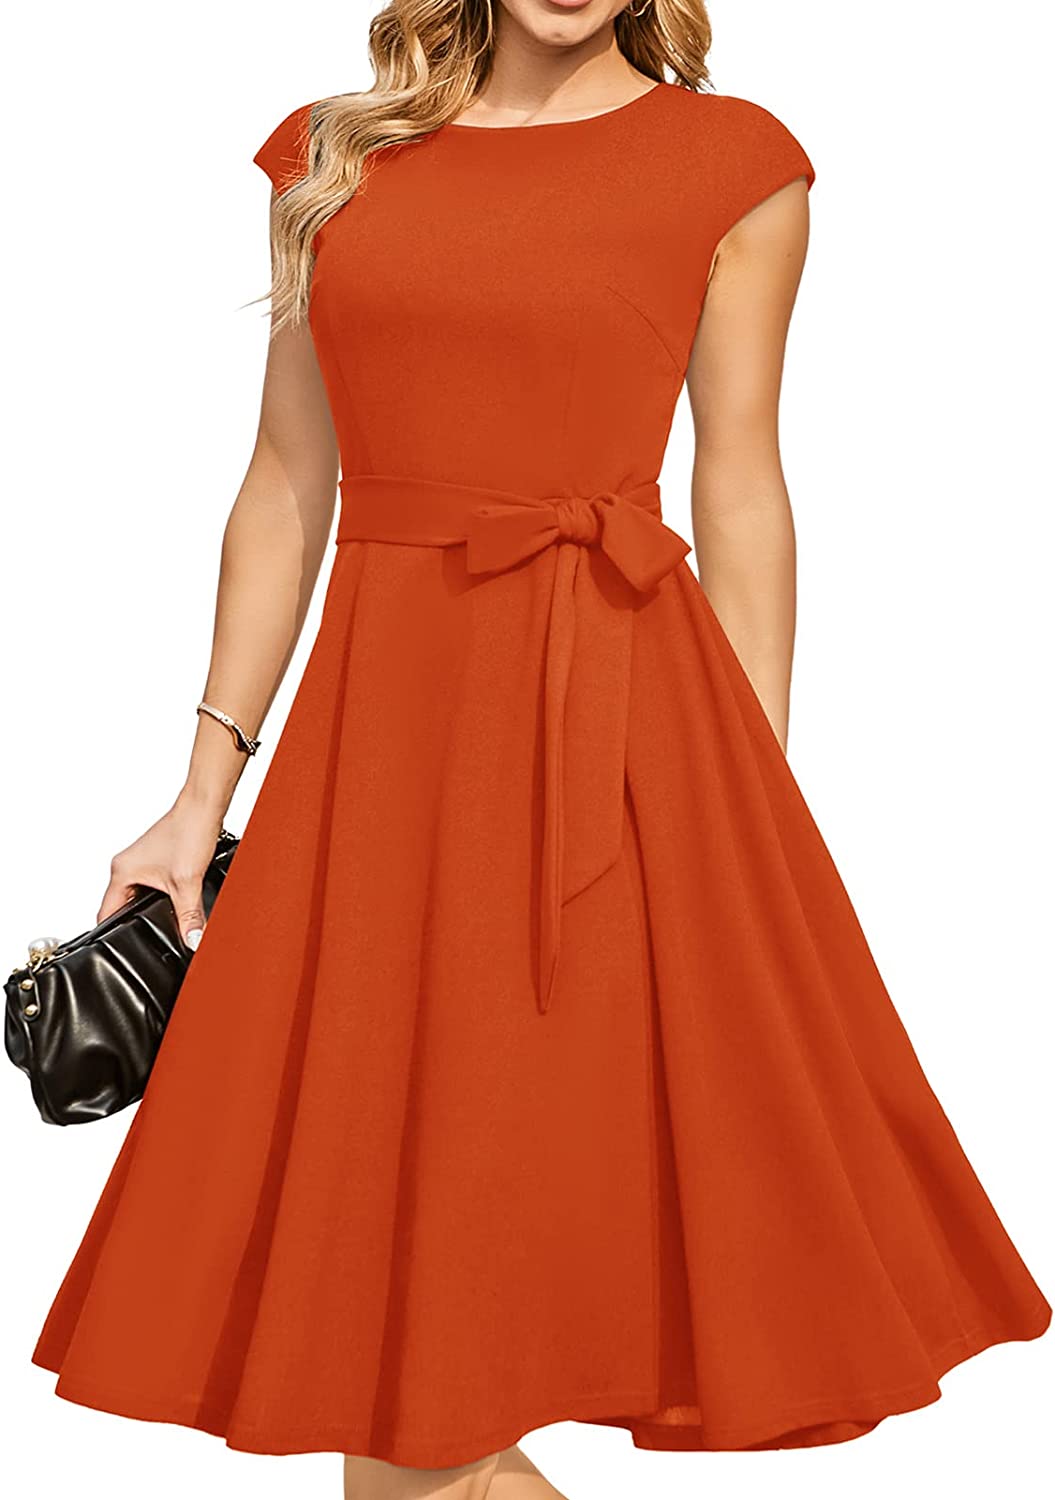 Ample Clothing - Party Dresses For Women Online Shopping